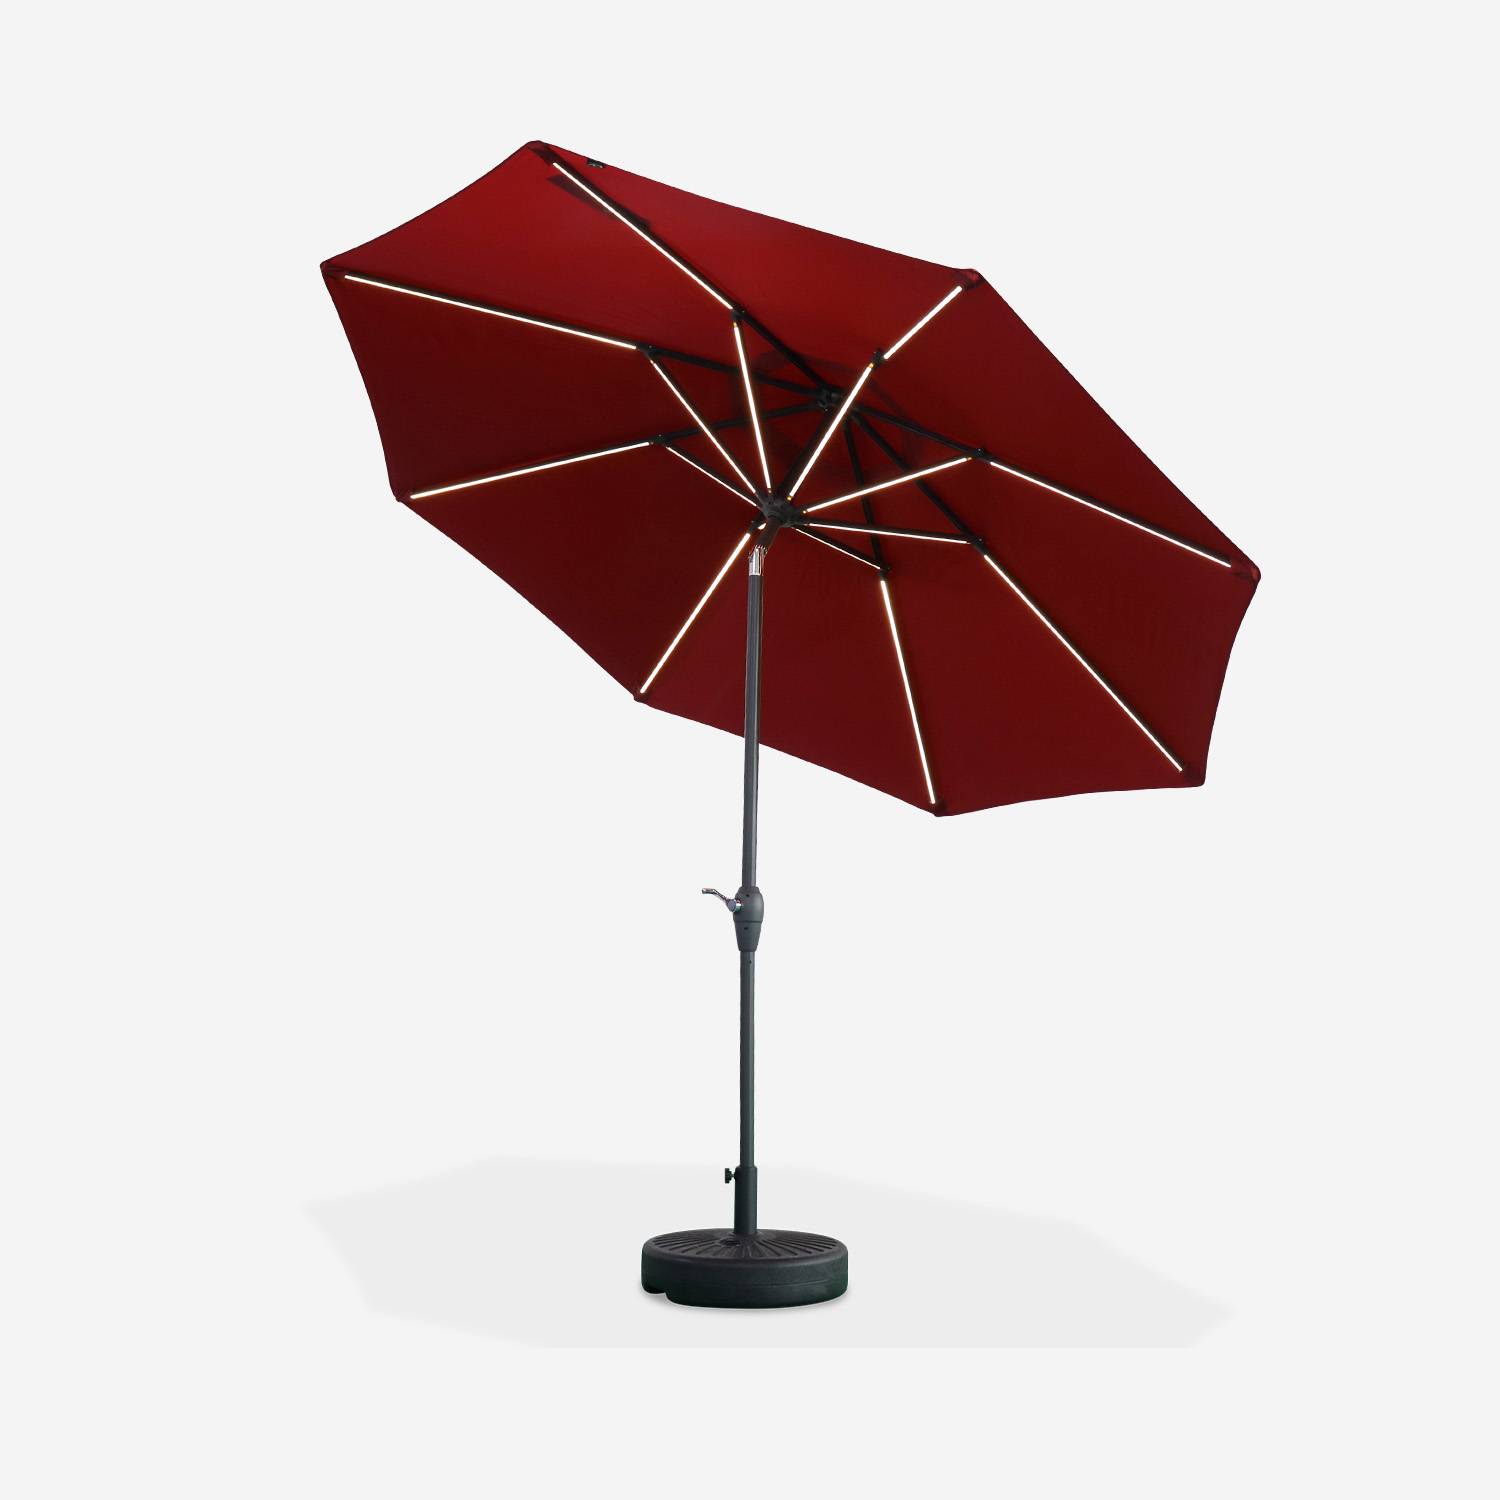 2.7m round centre pole LED parasol - adjustable aluminium central mast and crank handle opening - Helios - Red Photo4